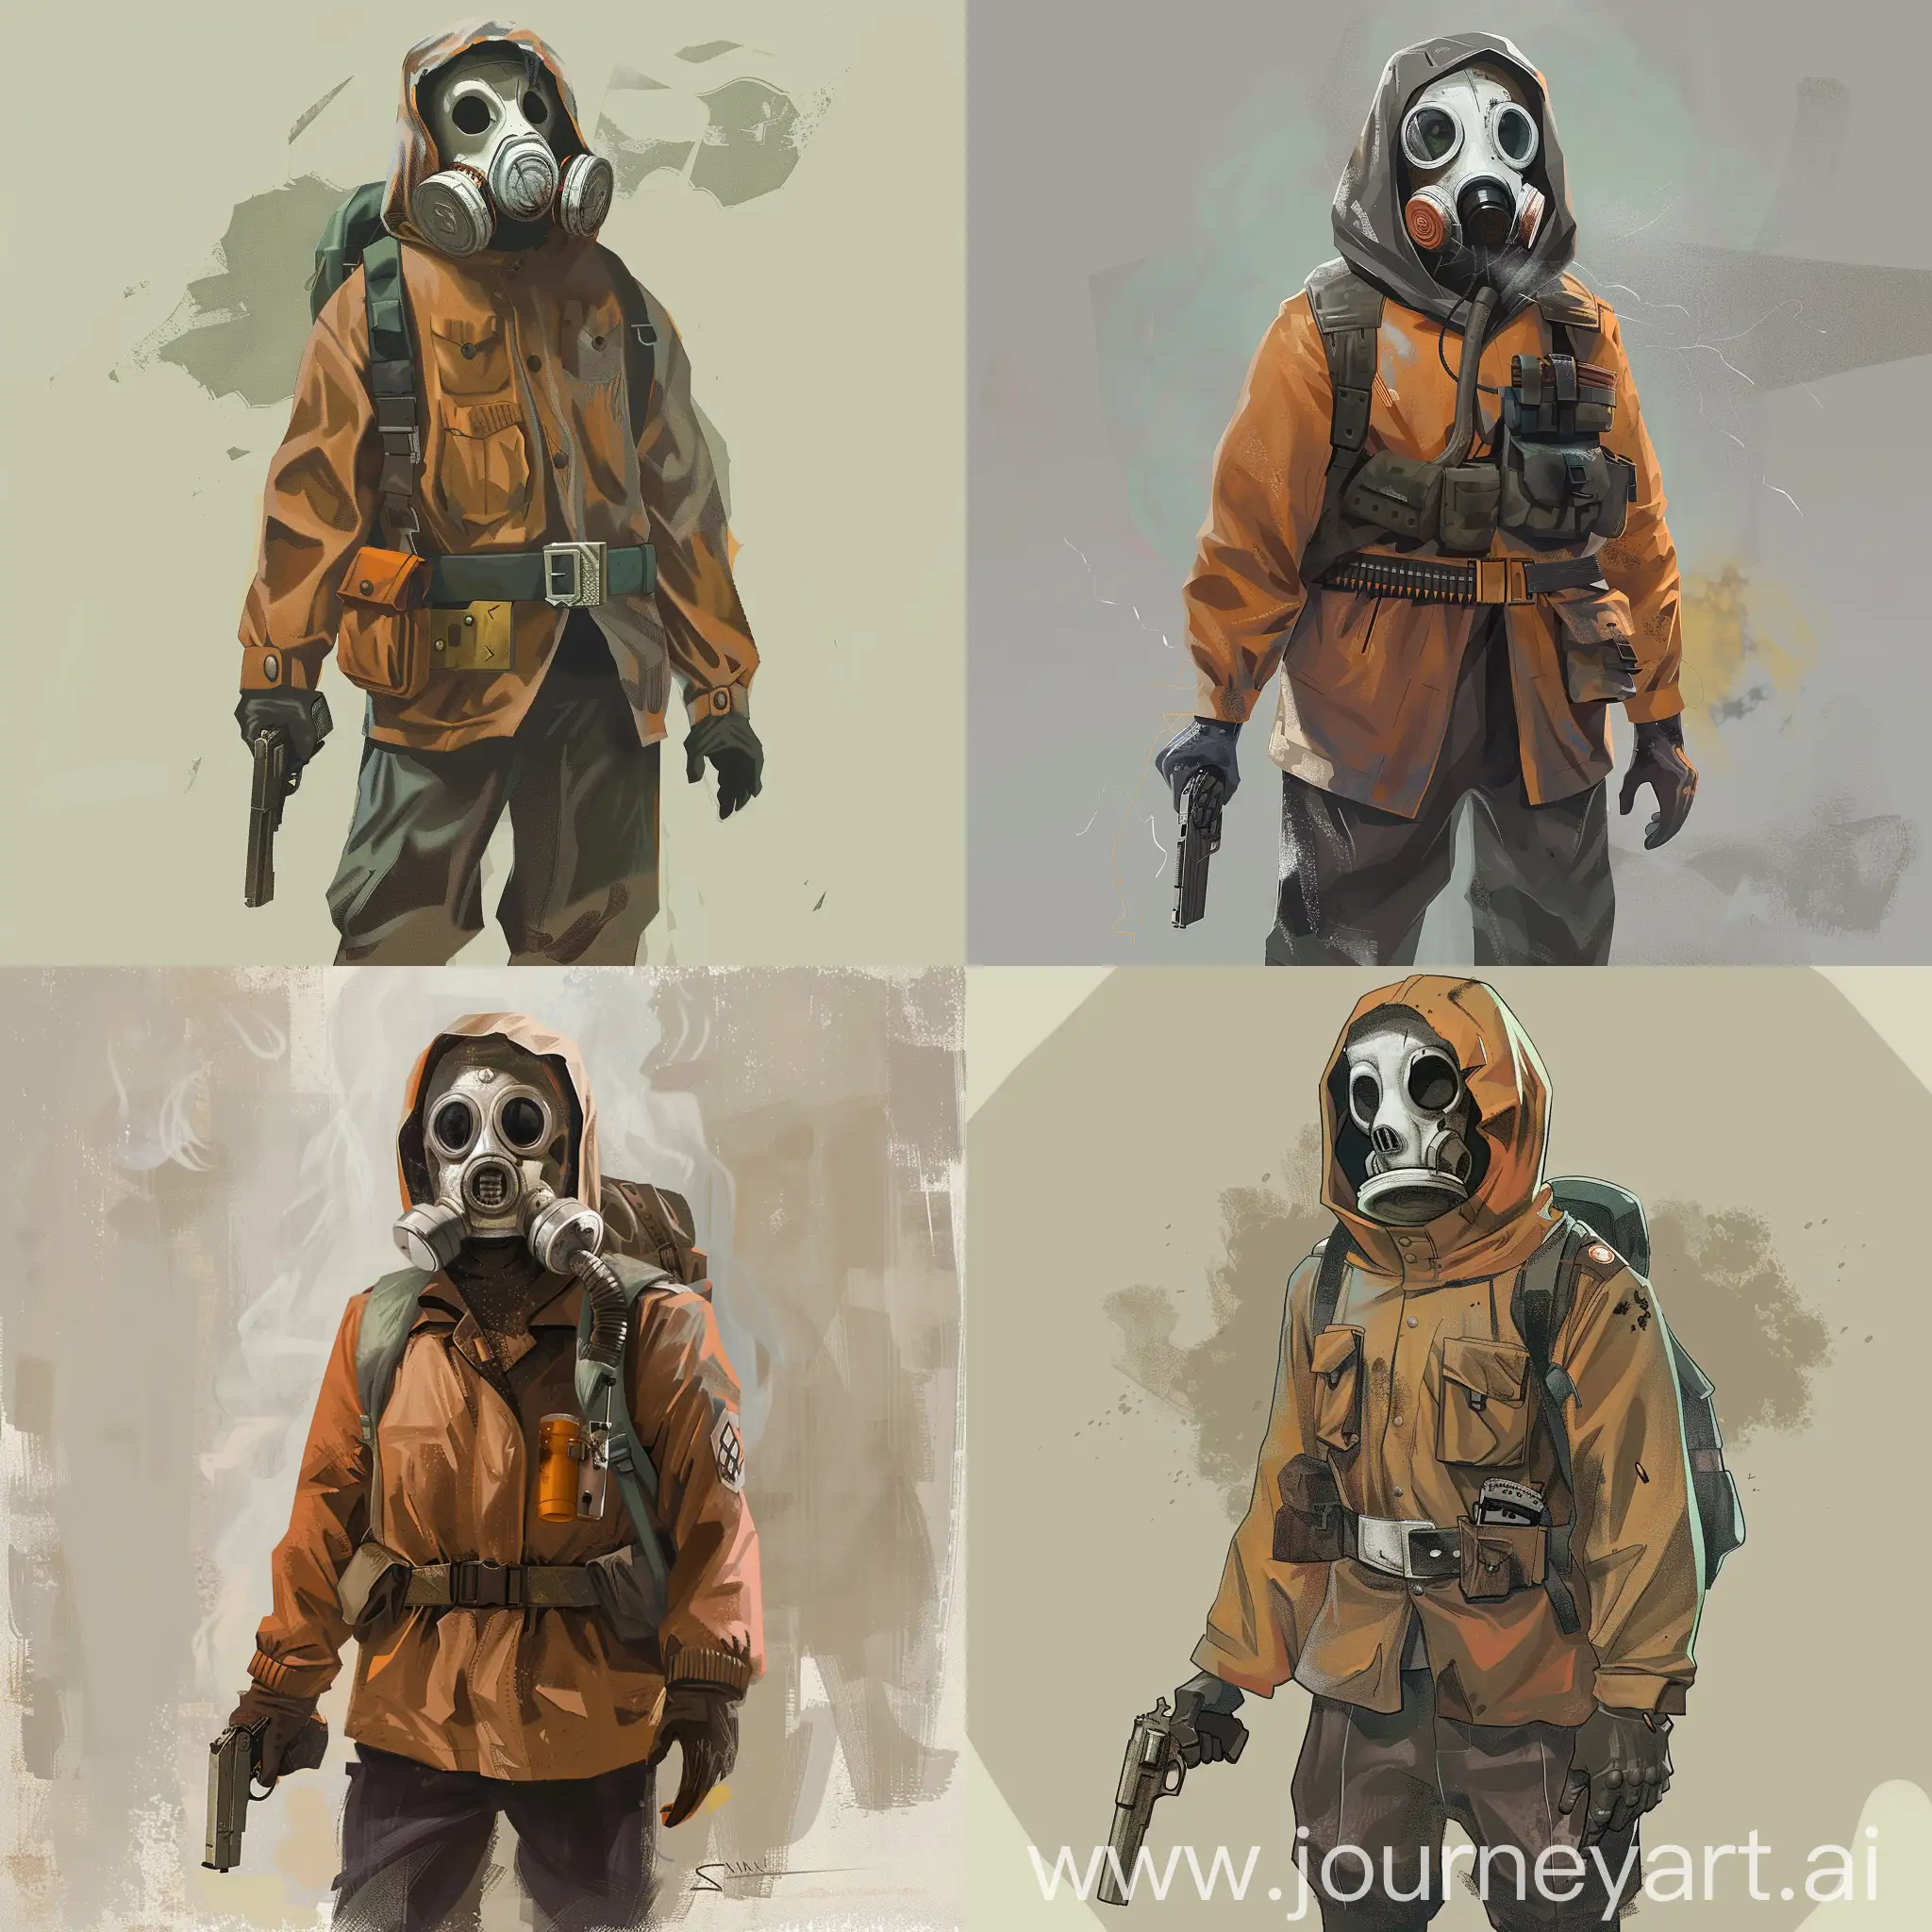 Concept art, comics style, stalker lone newcomer, a gasmask, a dirty light brown jacket, a Soviet belt, a small backpack on his back, a light military discharge on his body, pistol in one hand.